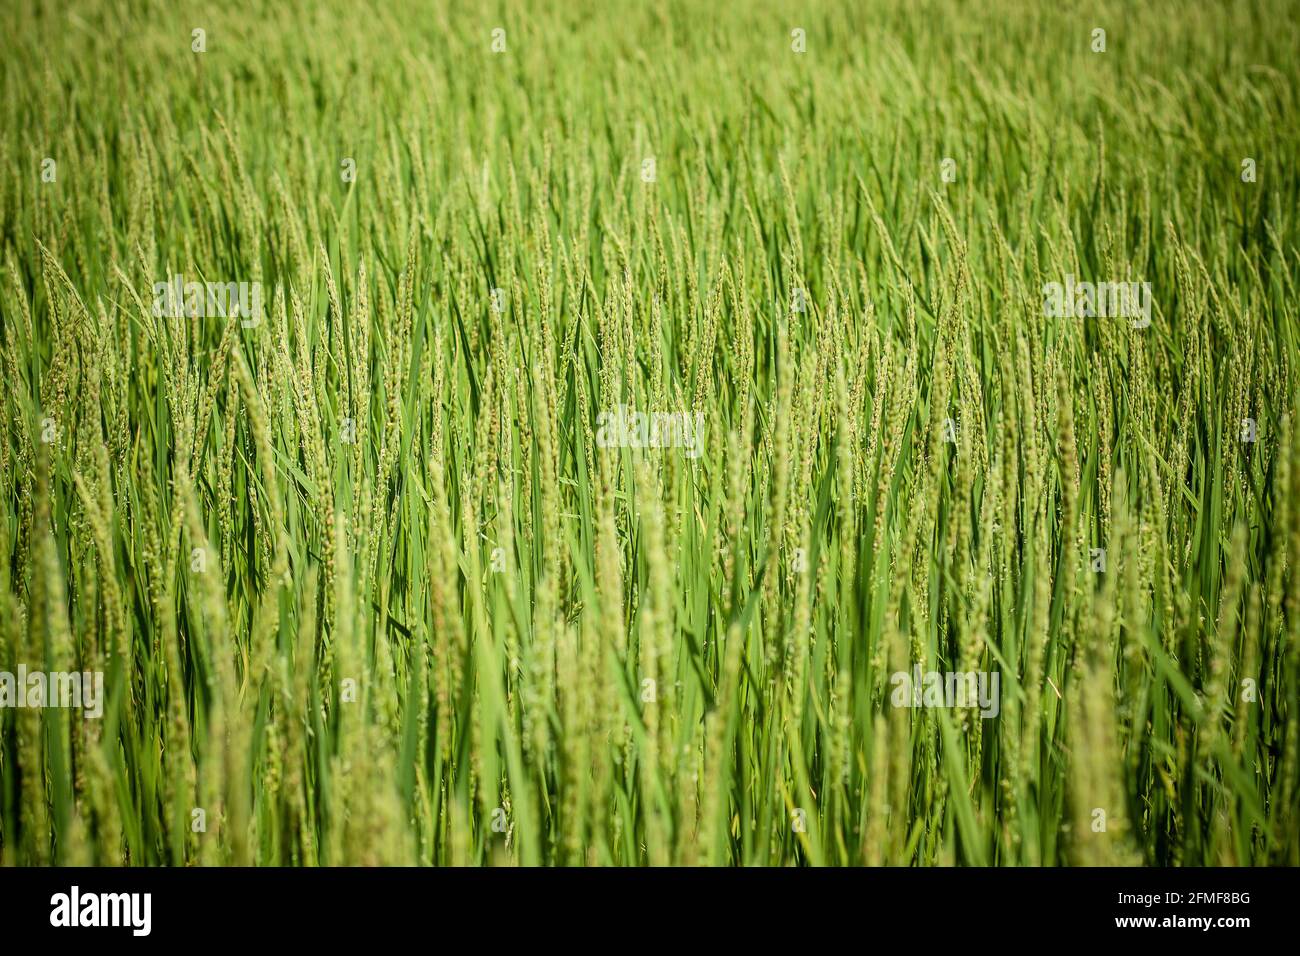 Rice plants in green color covering the entire frame and with shallow depth of field Stock Photo